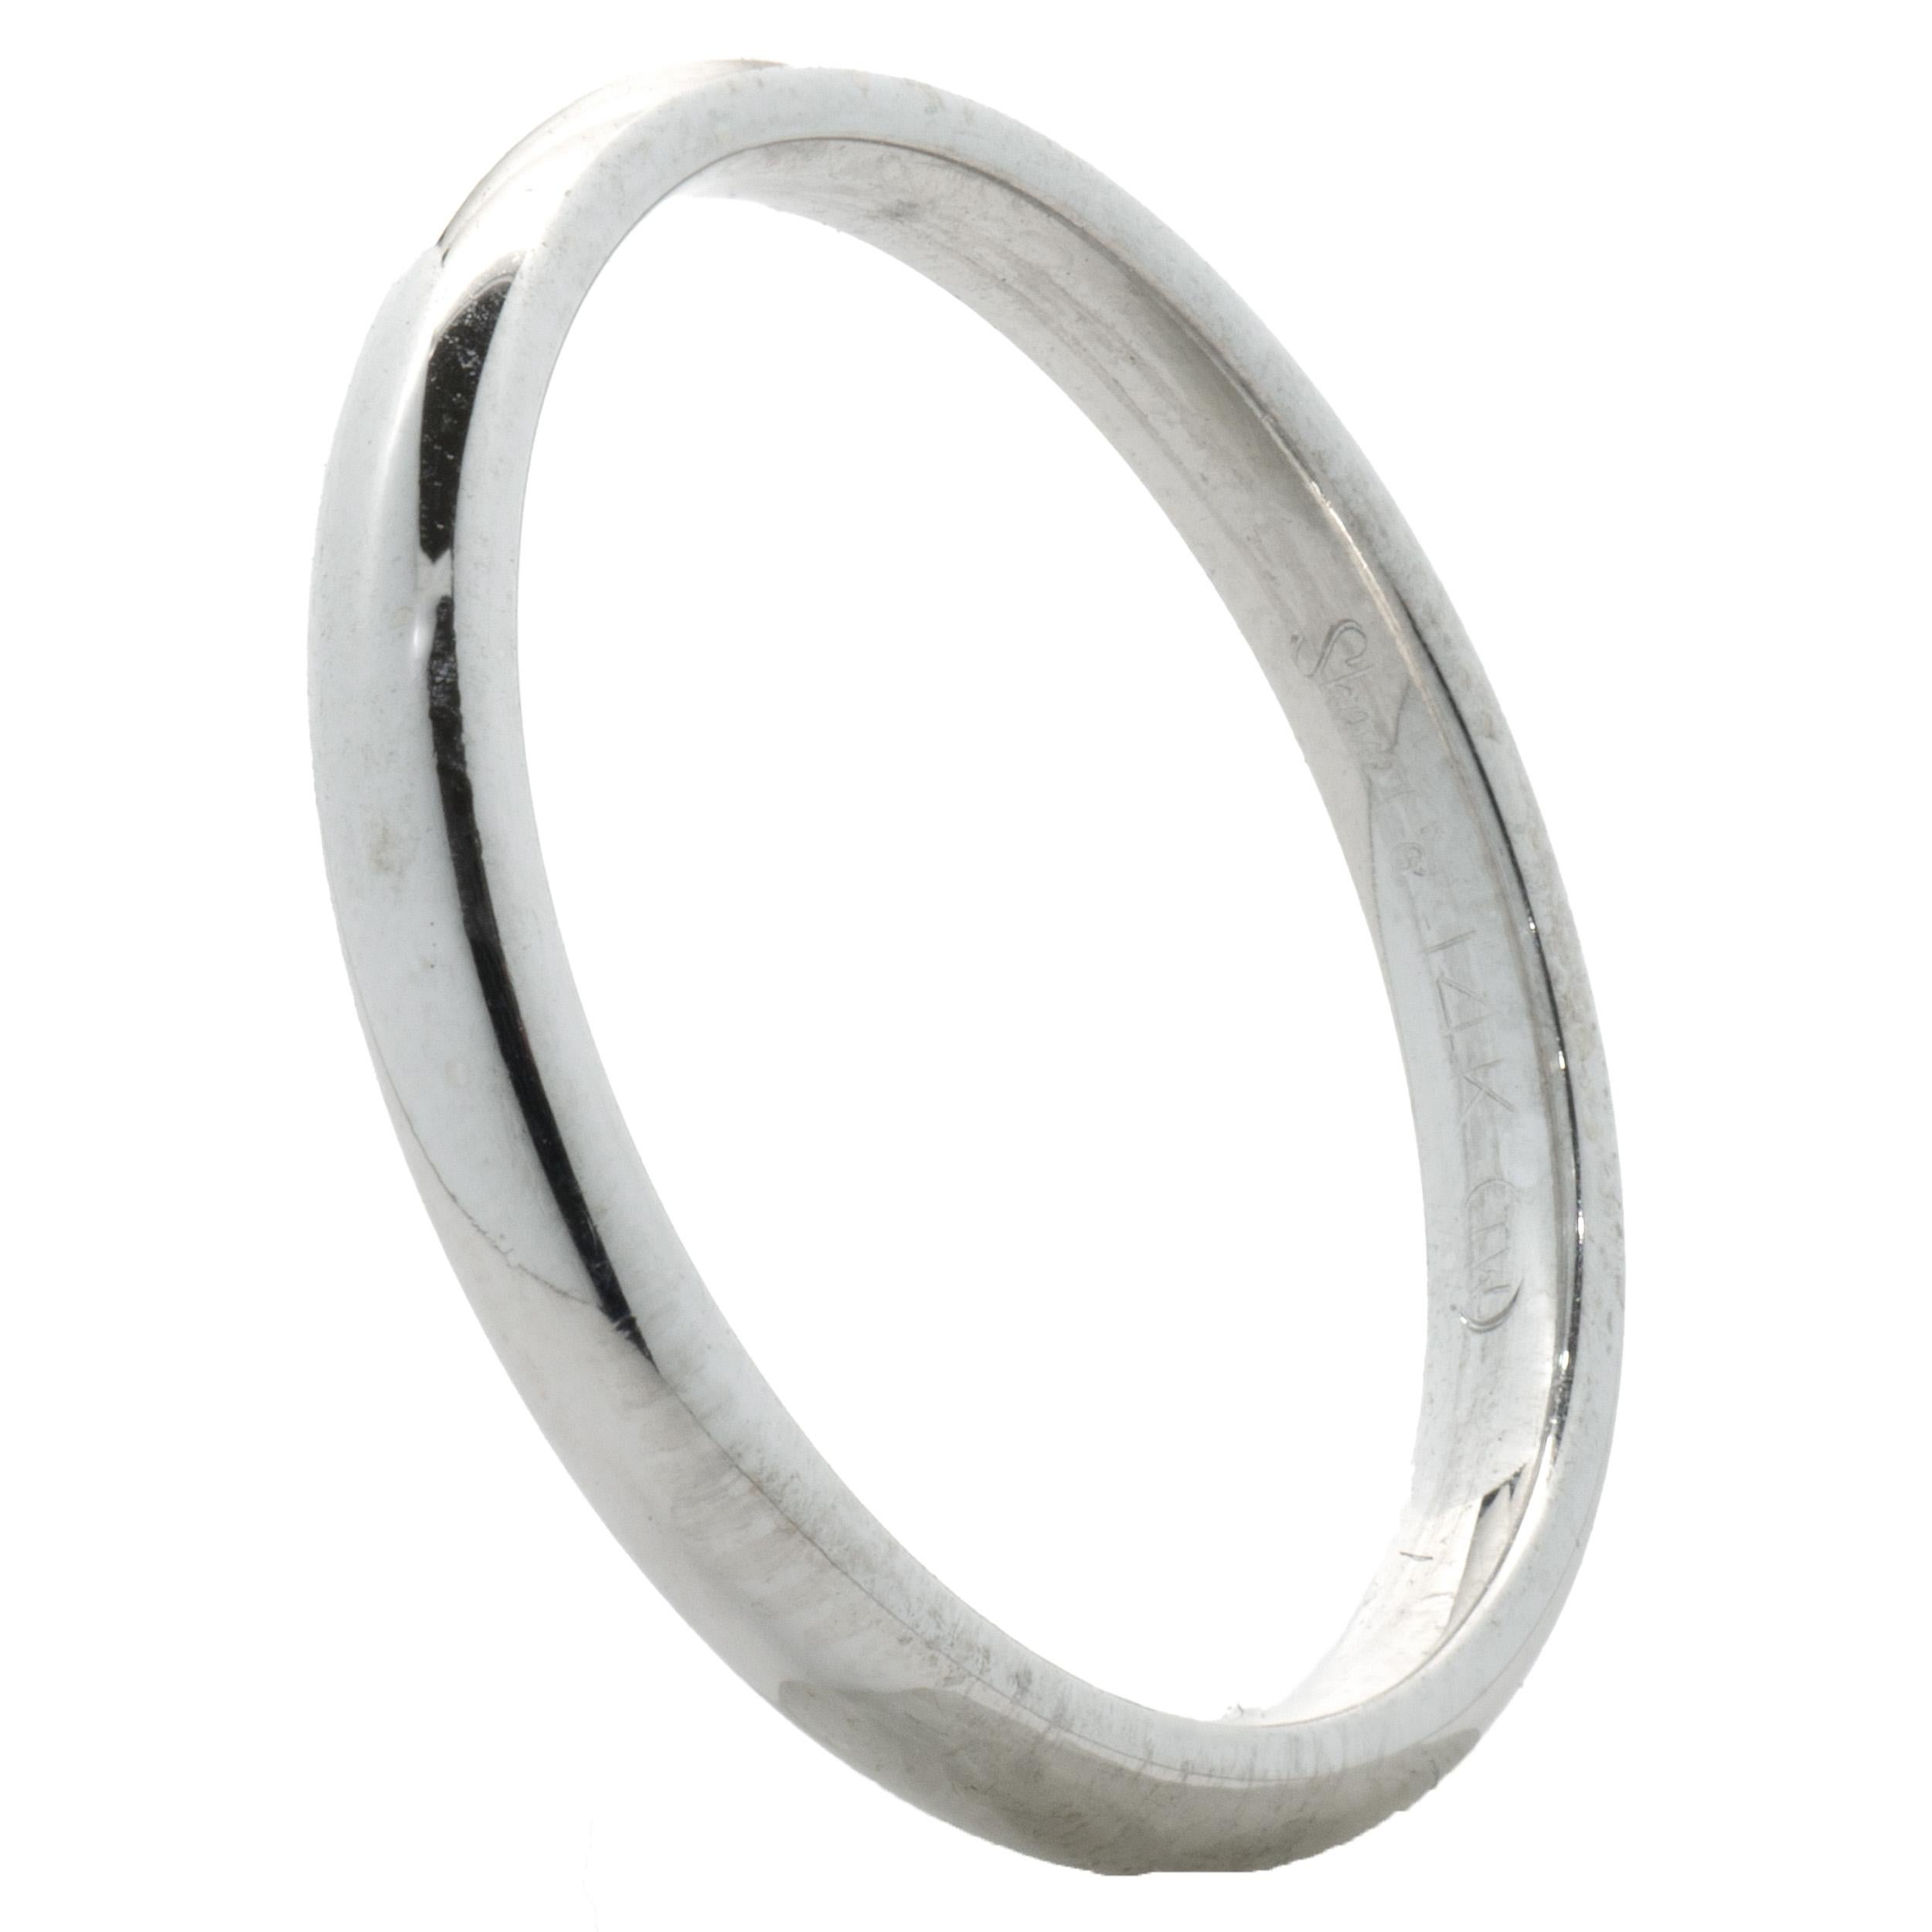 Designer: custom
Material: 14K white gold
Dimension: ring measures 2.2mm wide
Size: 5.5
Weight: 1.75 grams